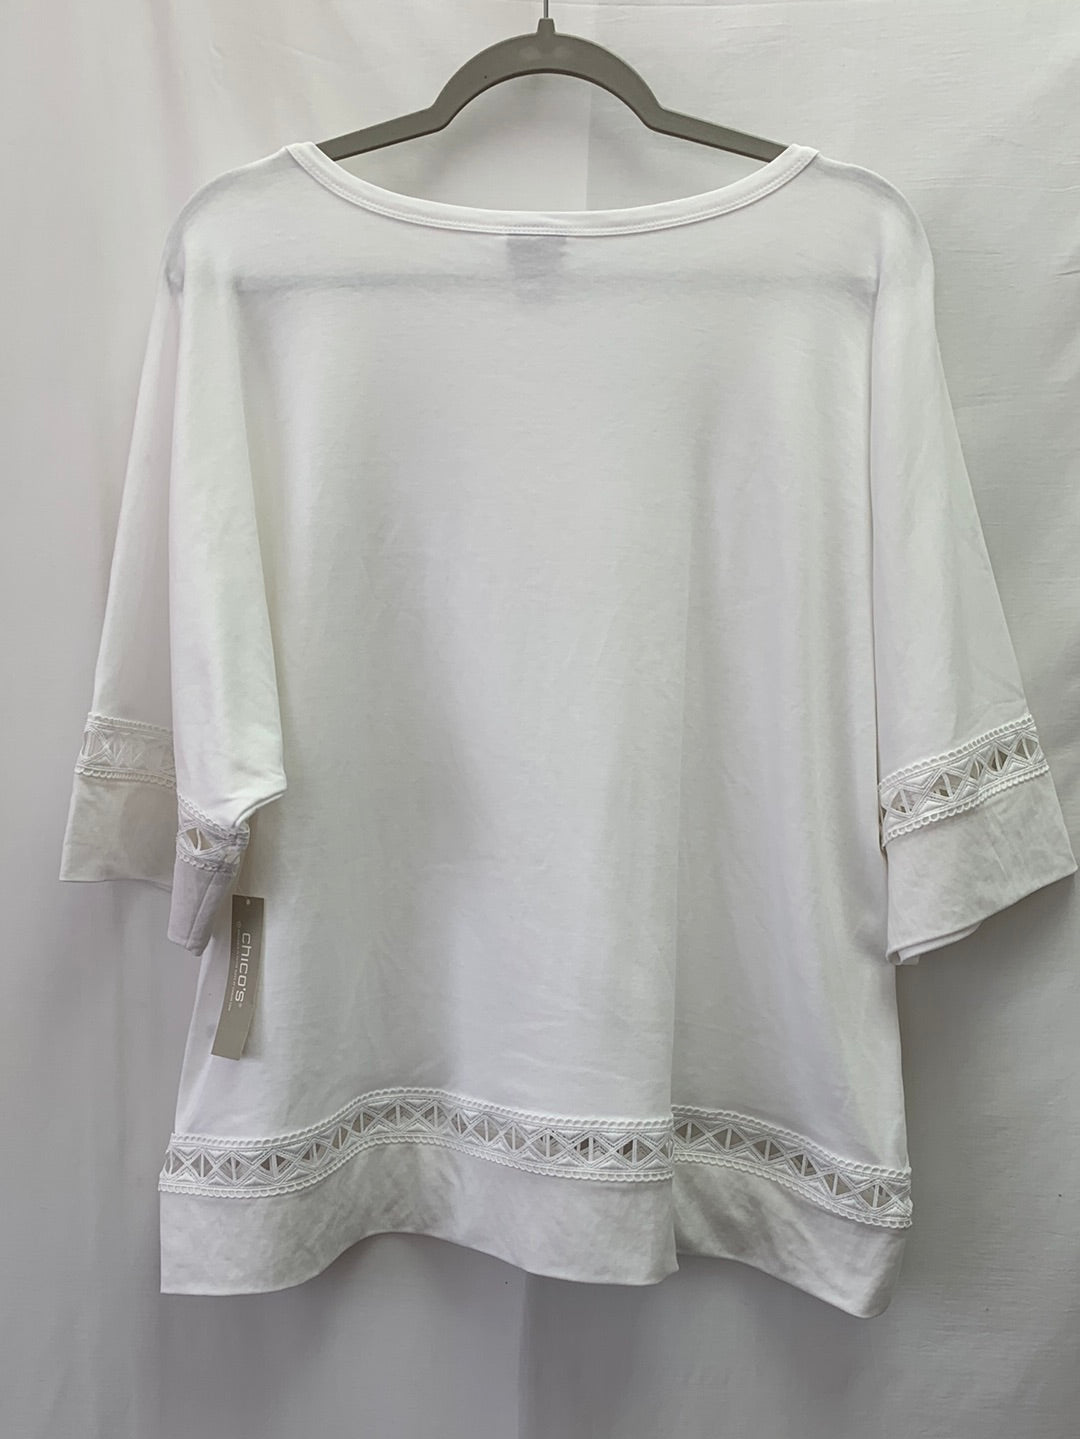 NWT - CHICO'S alabaster white Lace Trim 1/2 Sleeve Knit Top - 3 (XL 16/18)